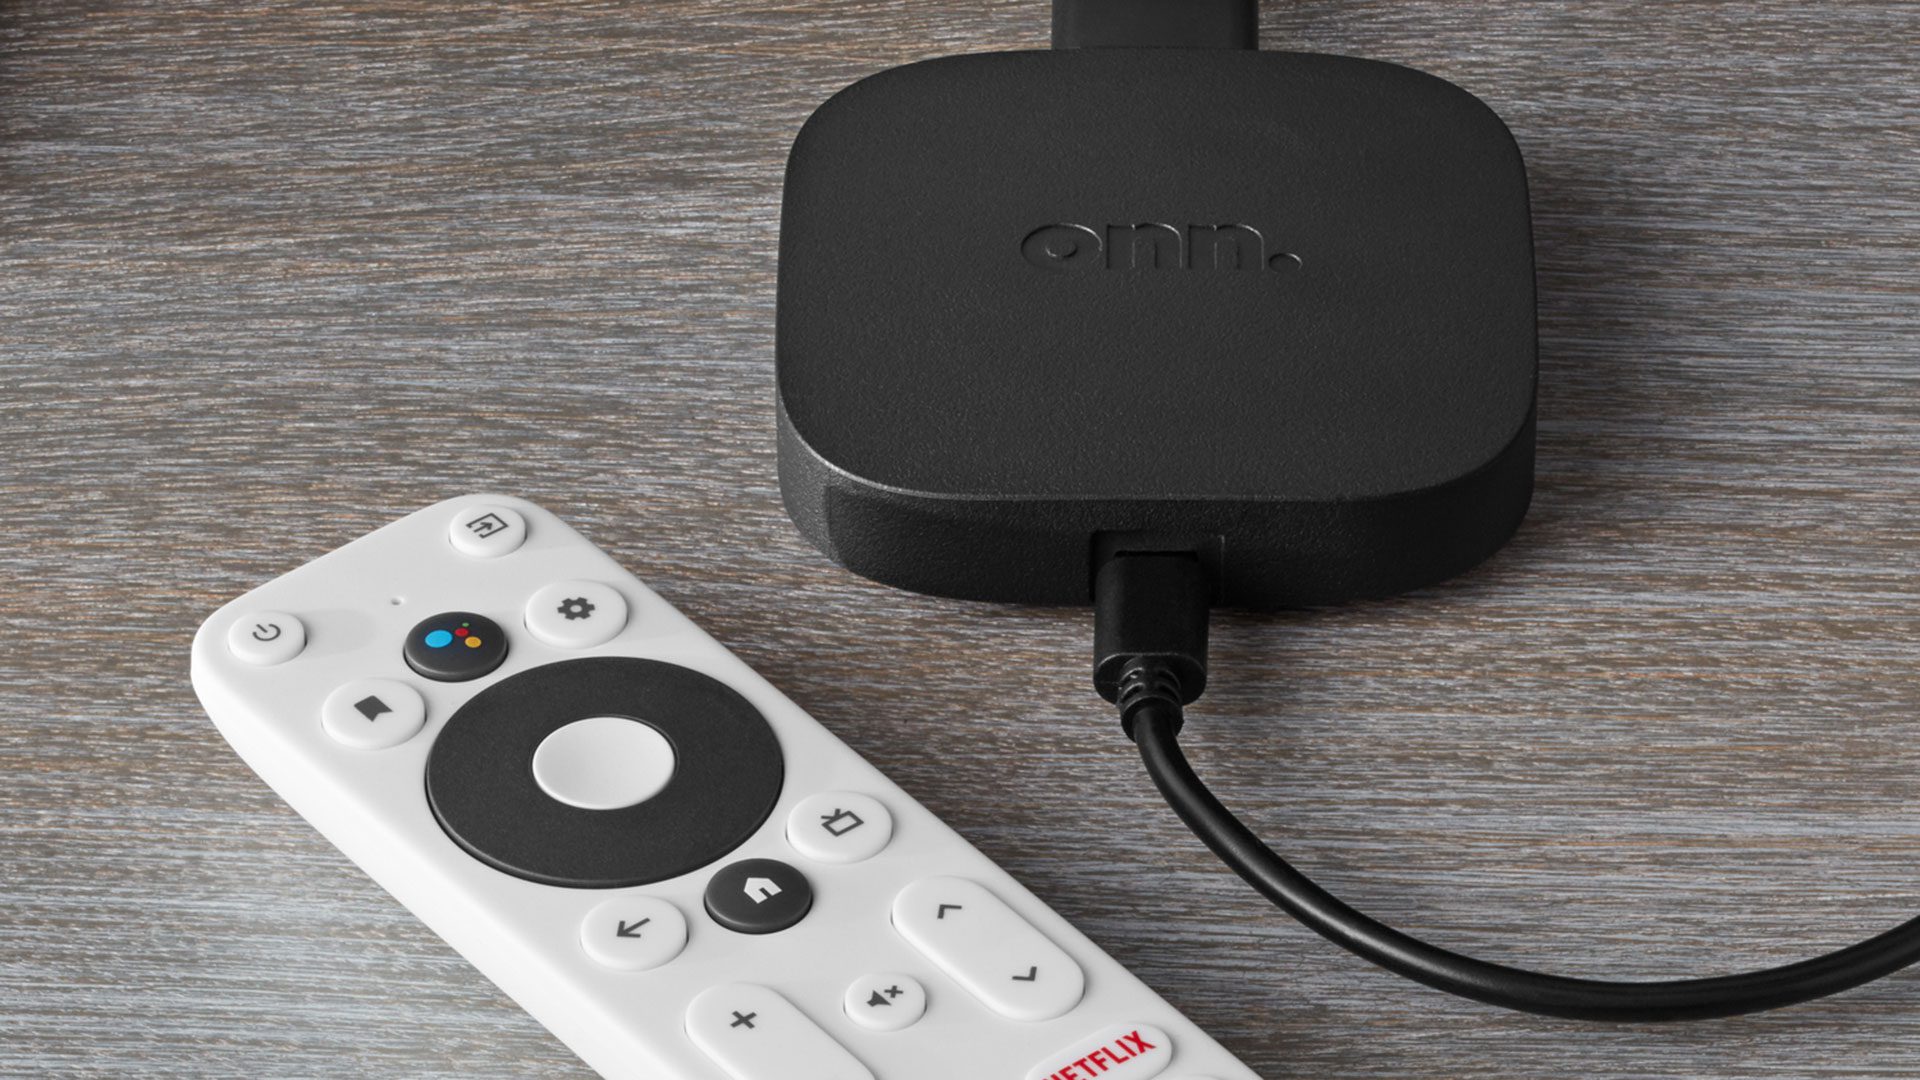 The Chromecast killer?  Walmart’s Leaked 4K Box Could Be the Ultimate Streaming Device